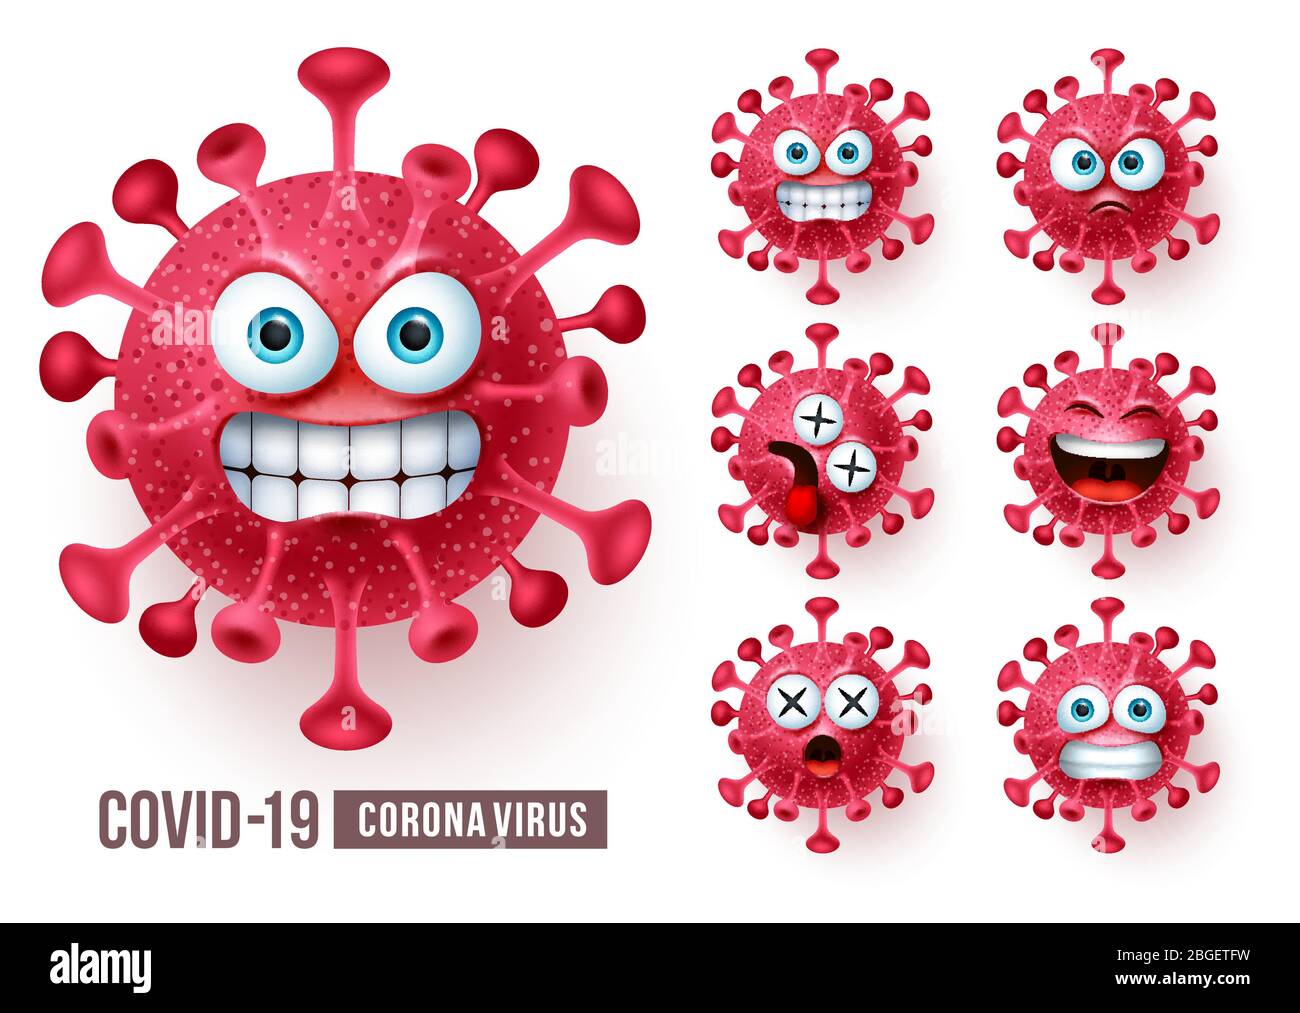 Corona virus emoticons vector set. Covid19 corona virus emoticons or emojis with angry and scary facial expressions in white background. Stock Vector